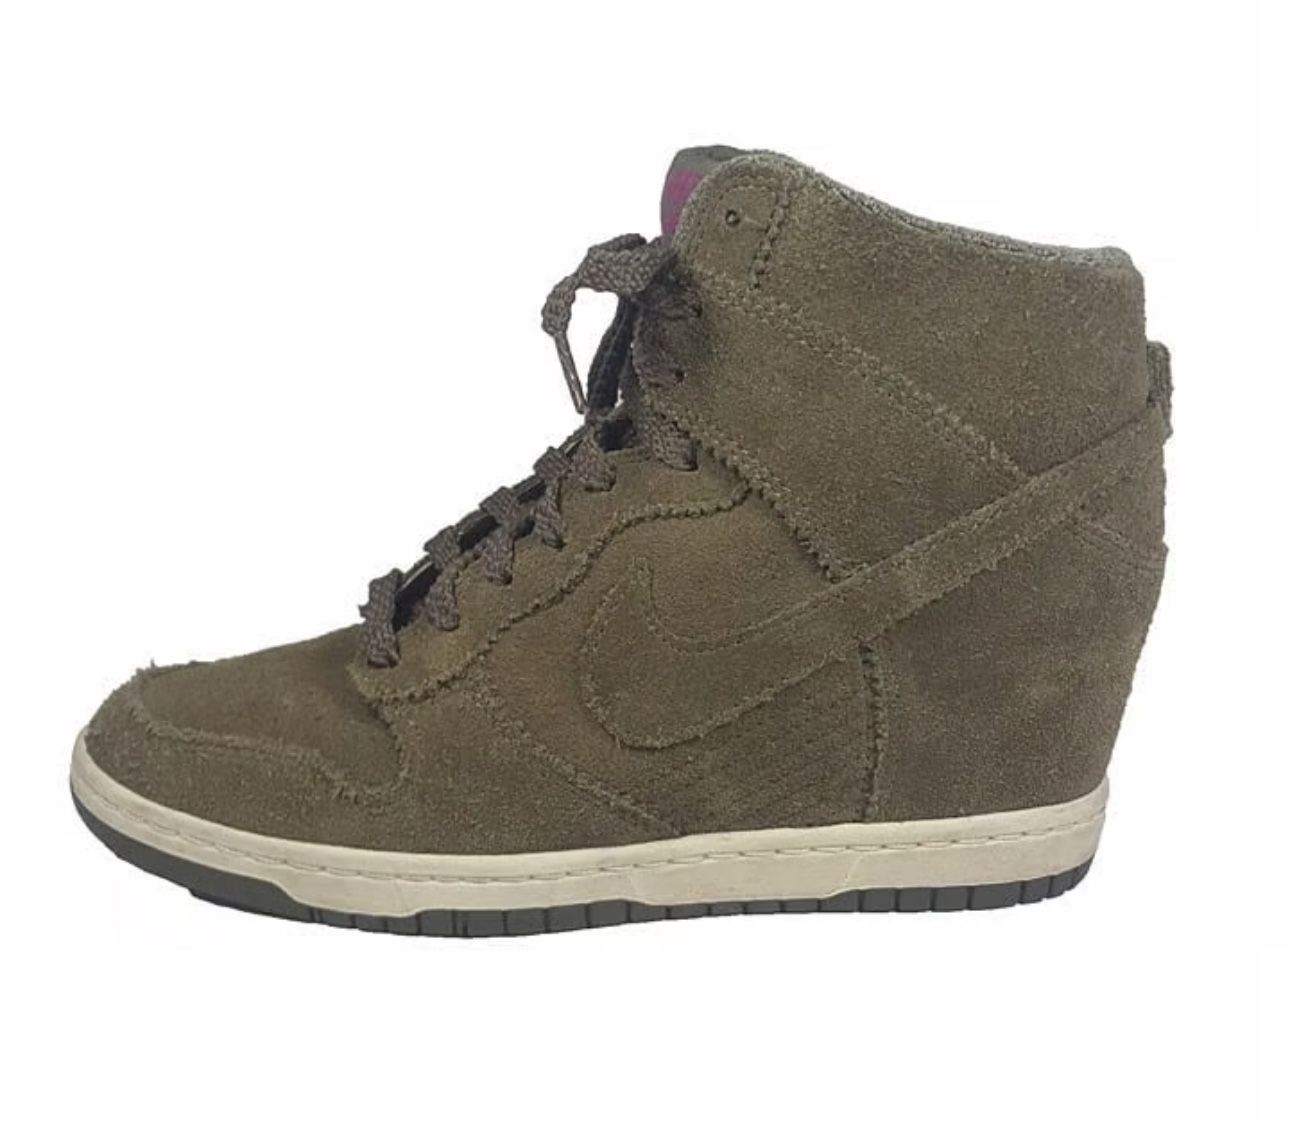 Nike Wedge Boots for Women